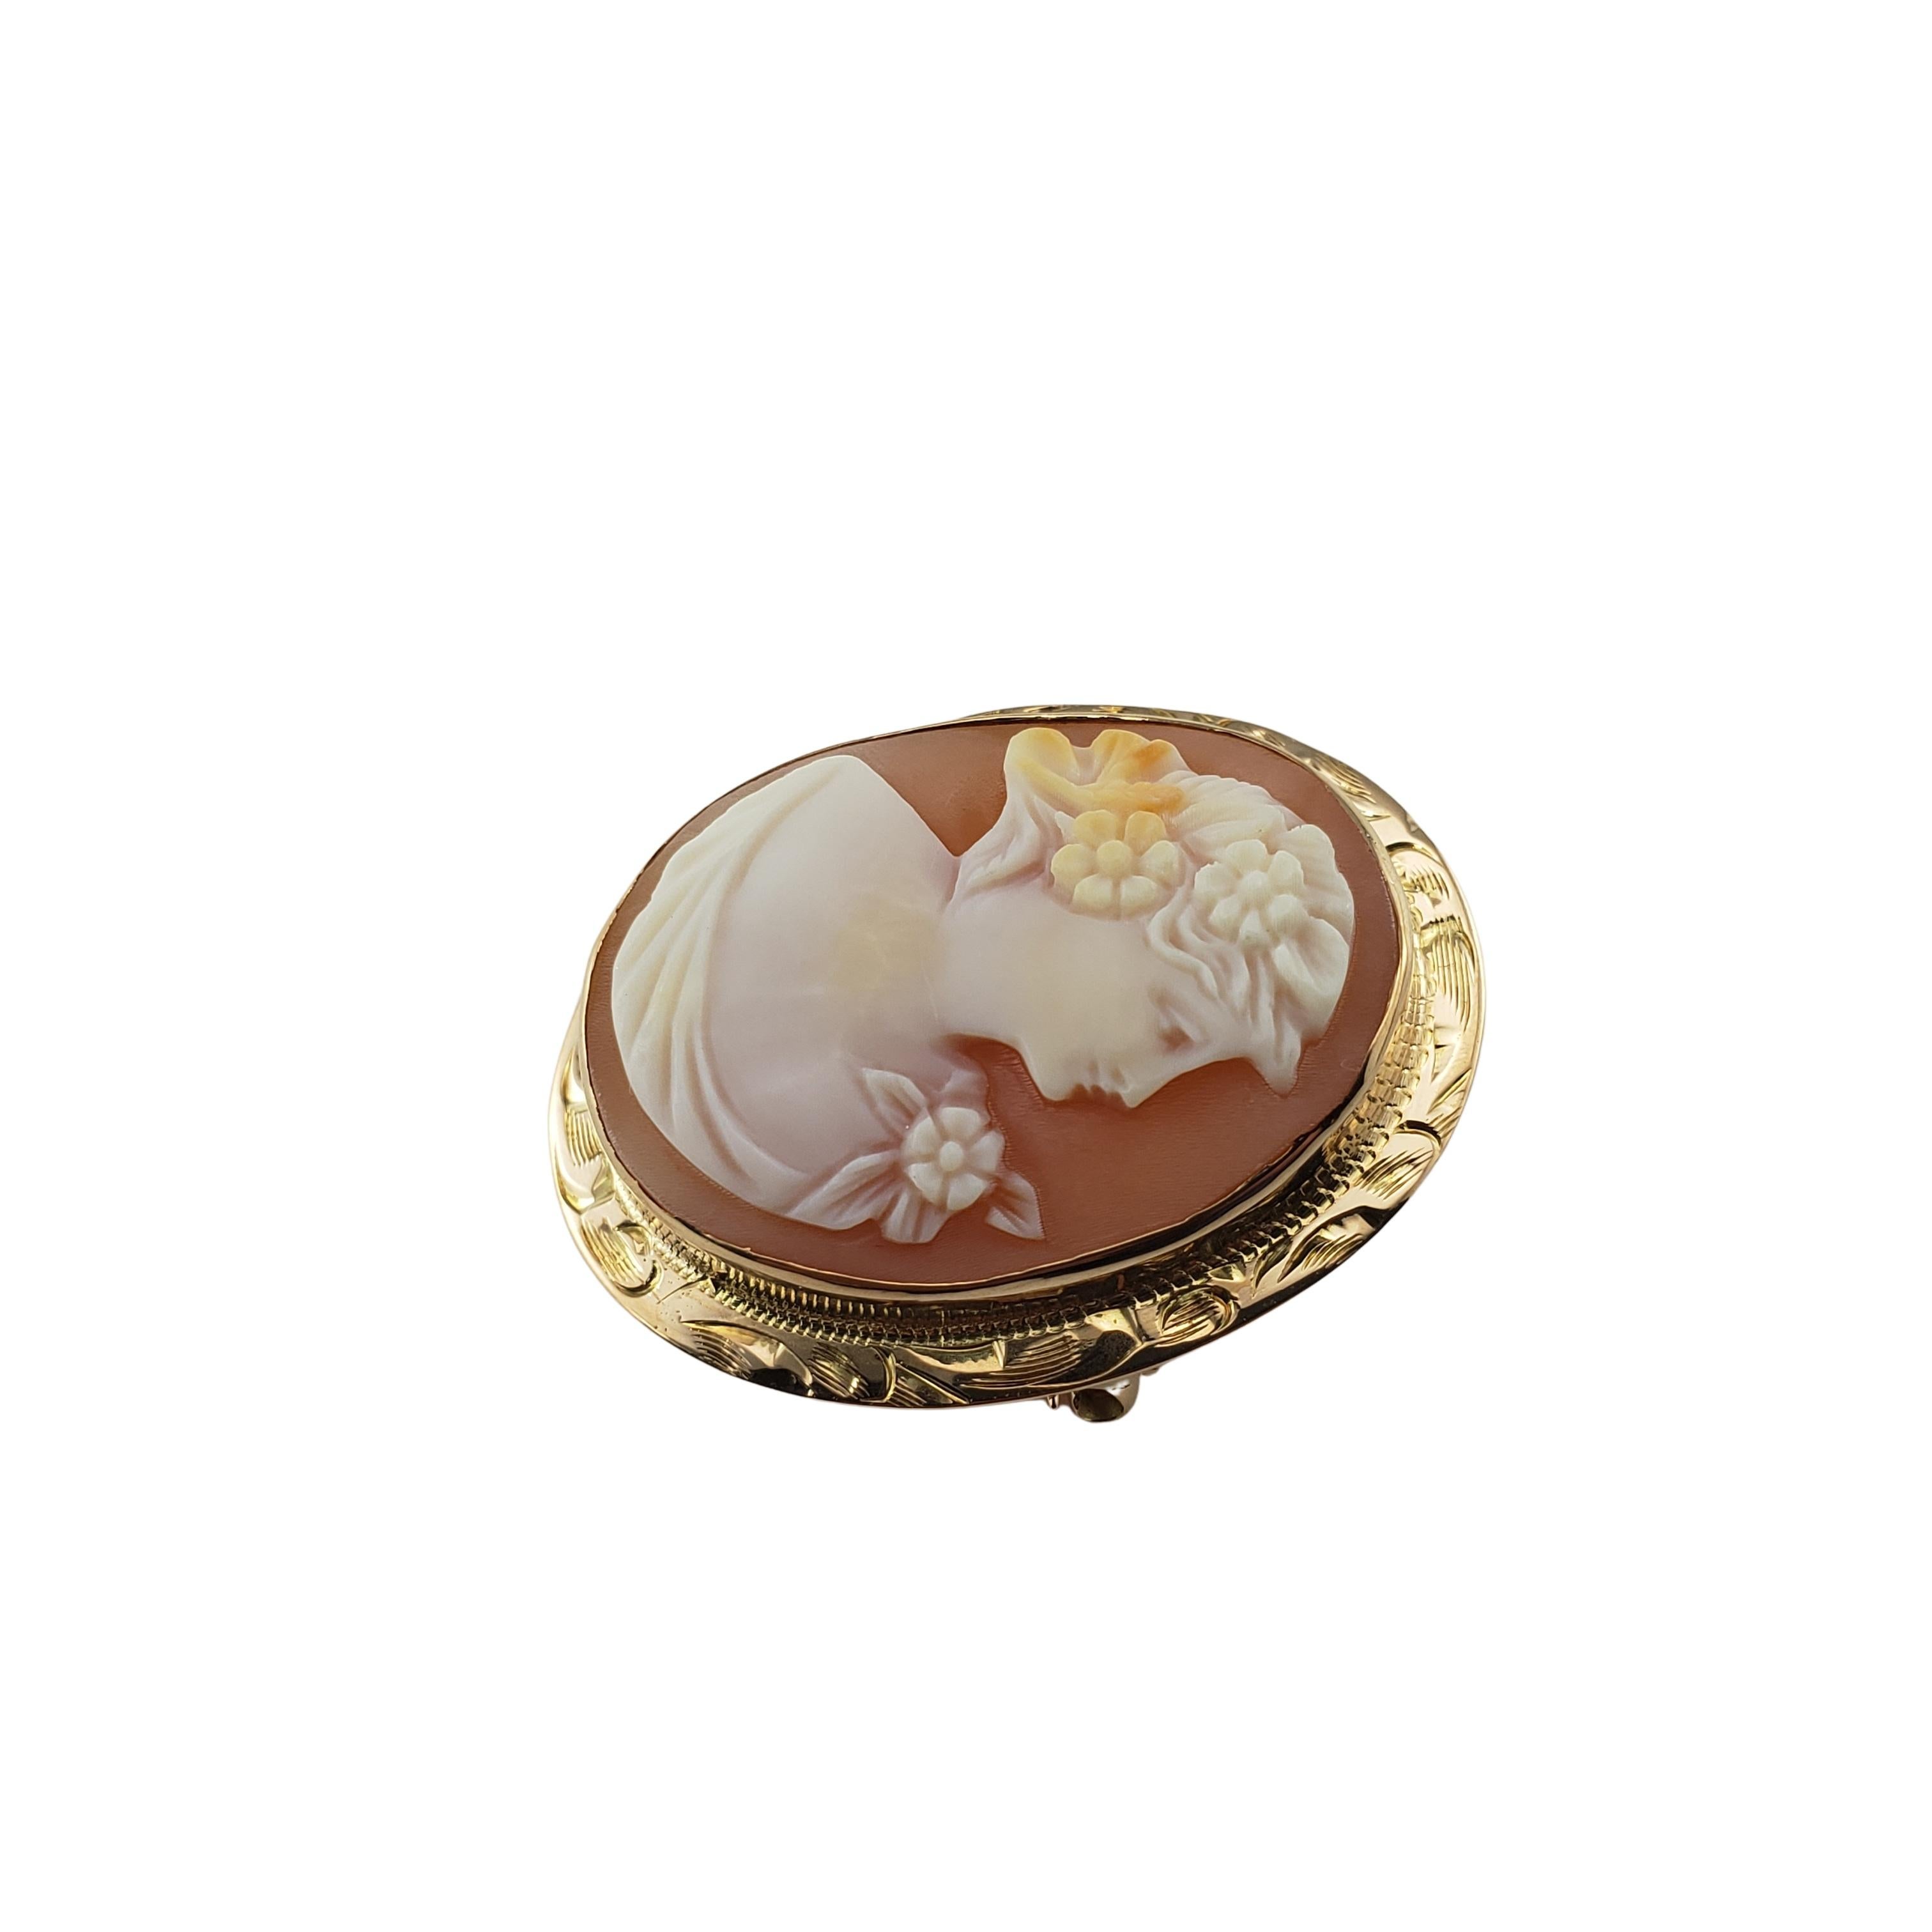 Vintage 10 Karat Yellow Gold Cameo Brooch/Pin-

This elegant cameo brooch features a lovely lady in profile set in beautifully detailed 10K yellow gold.

Size: 29 mm x 23 mm

Weight: 2.7 dwt. / 4.3 gr.

Stamped: 10K

Very good condition,